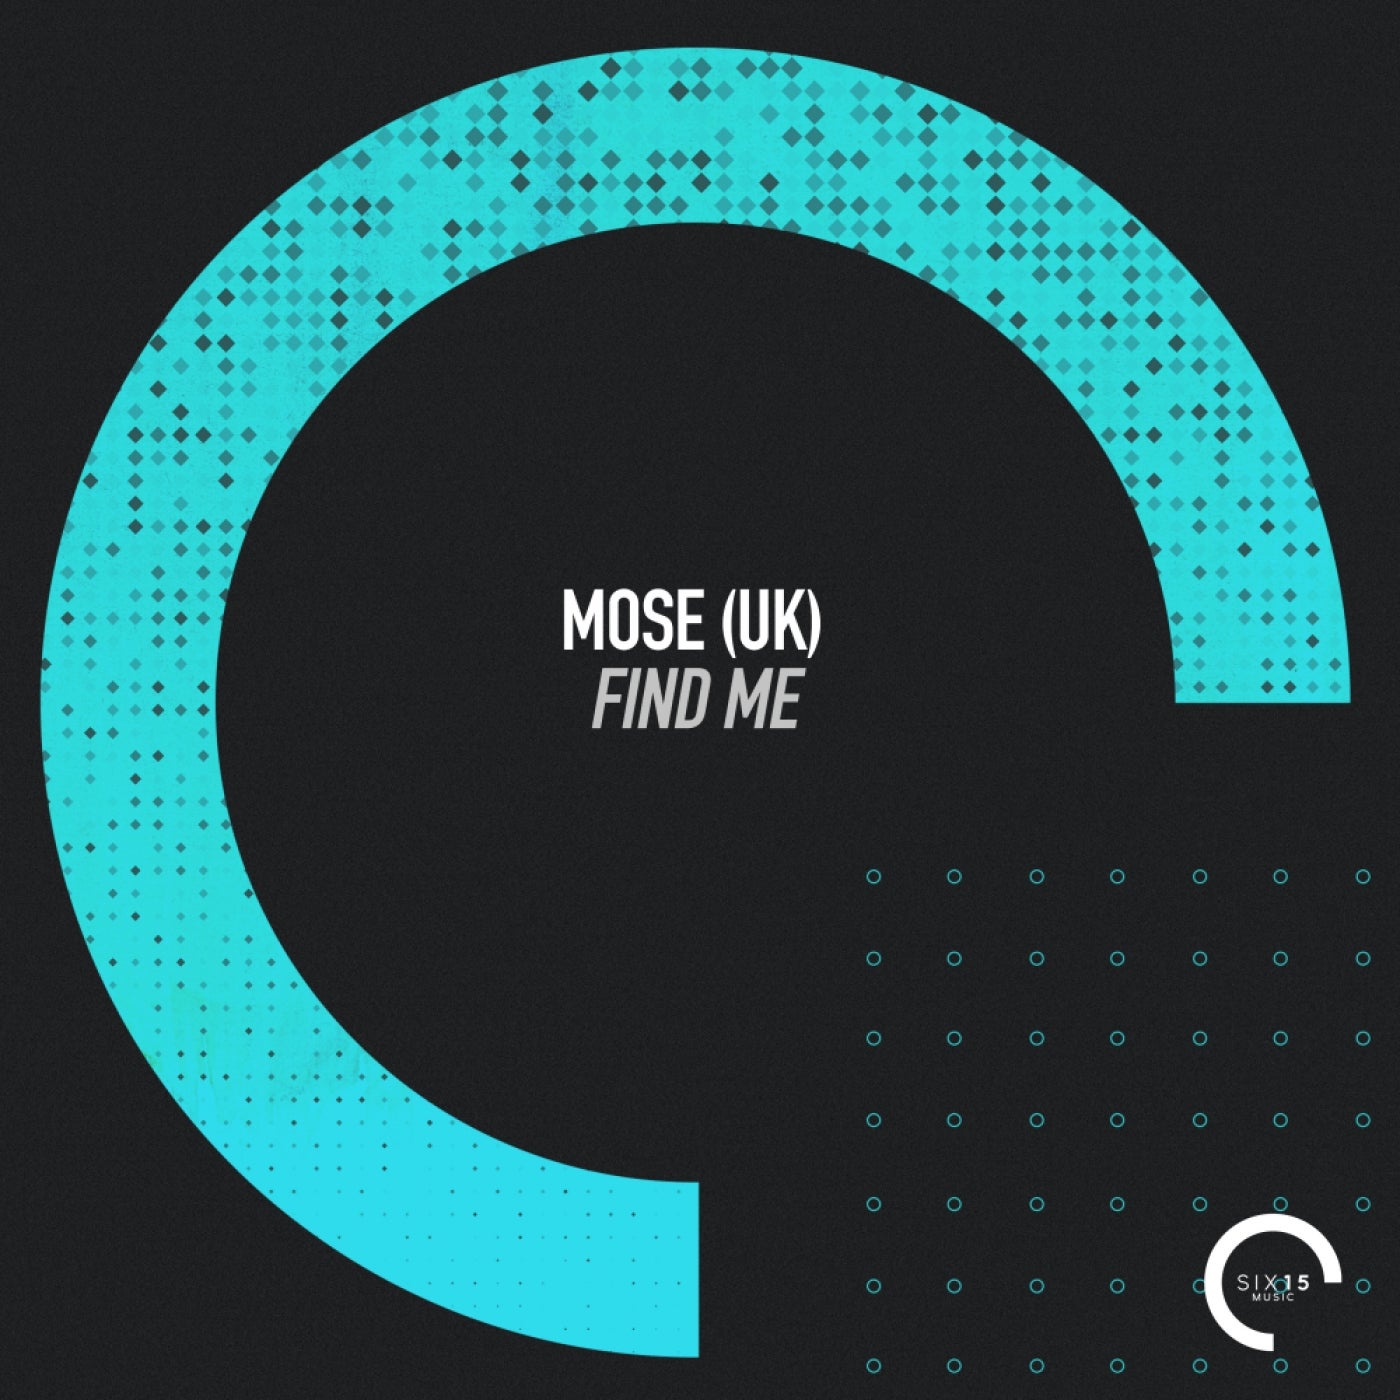 Find Me (Extended Mix)